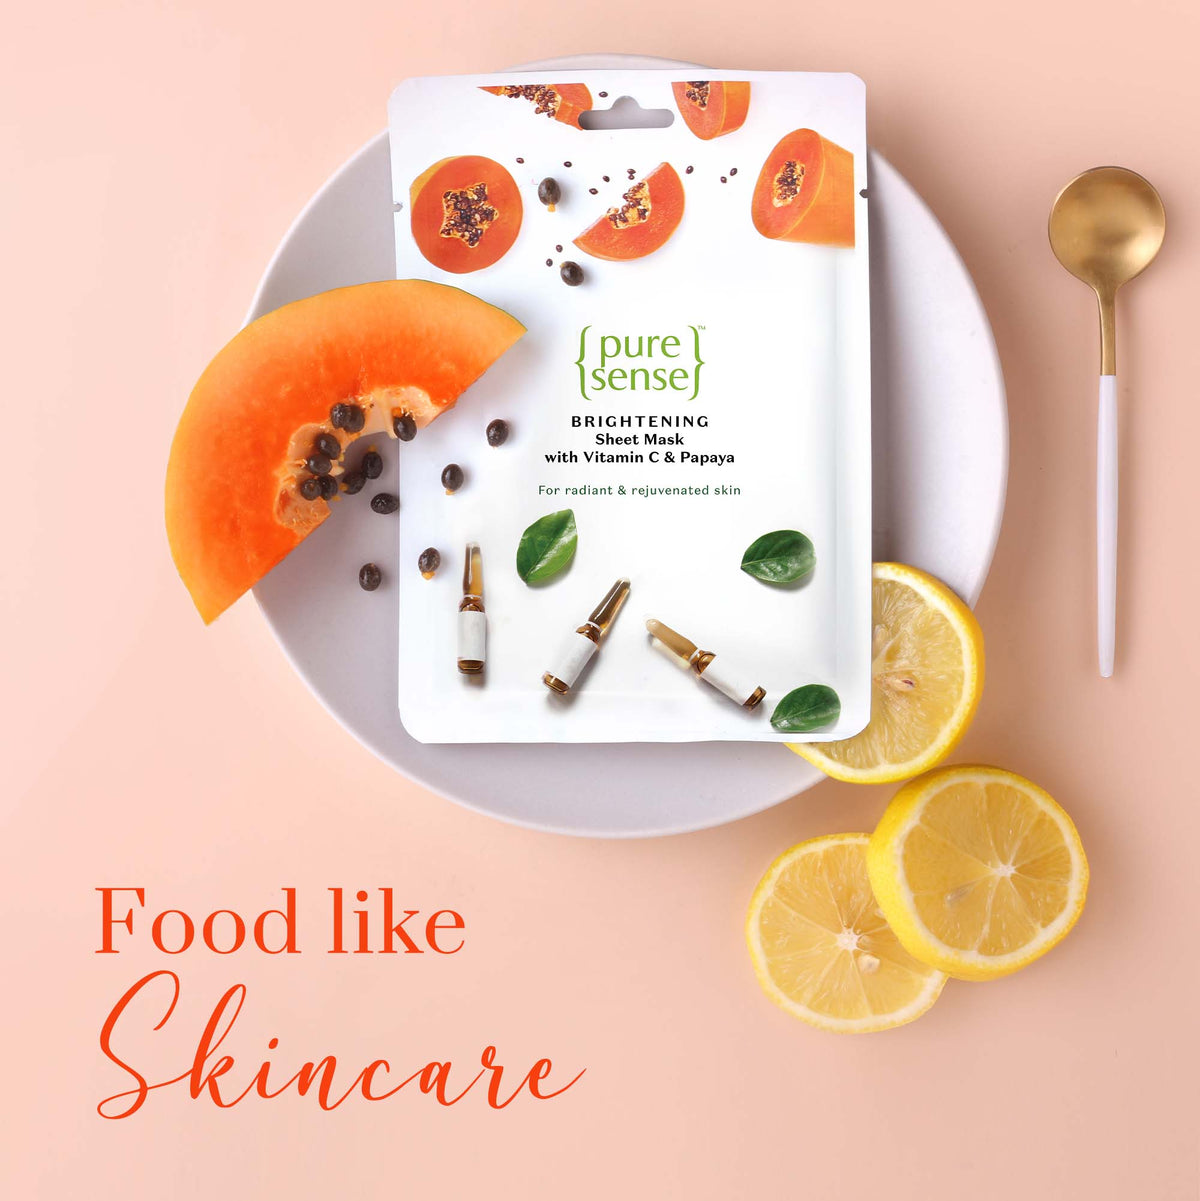 Brightening Sheet Mask with Vitamin C & Papaya | From the makers of Parachute Advansed | 15ml - PureSense